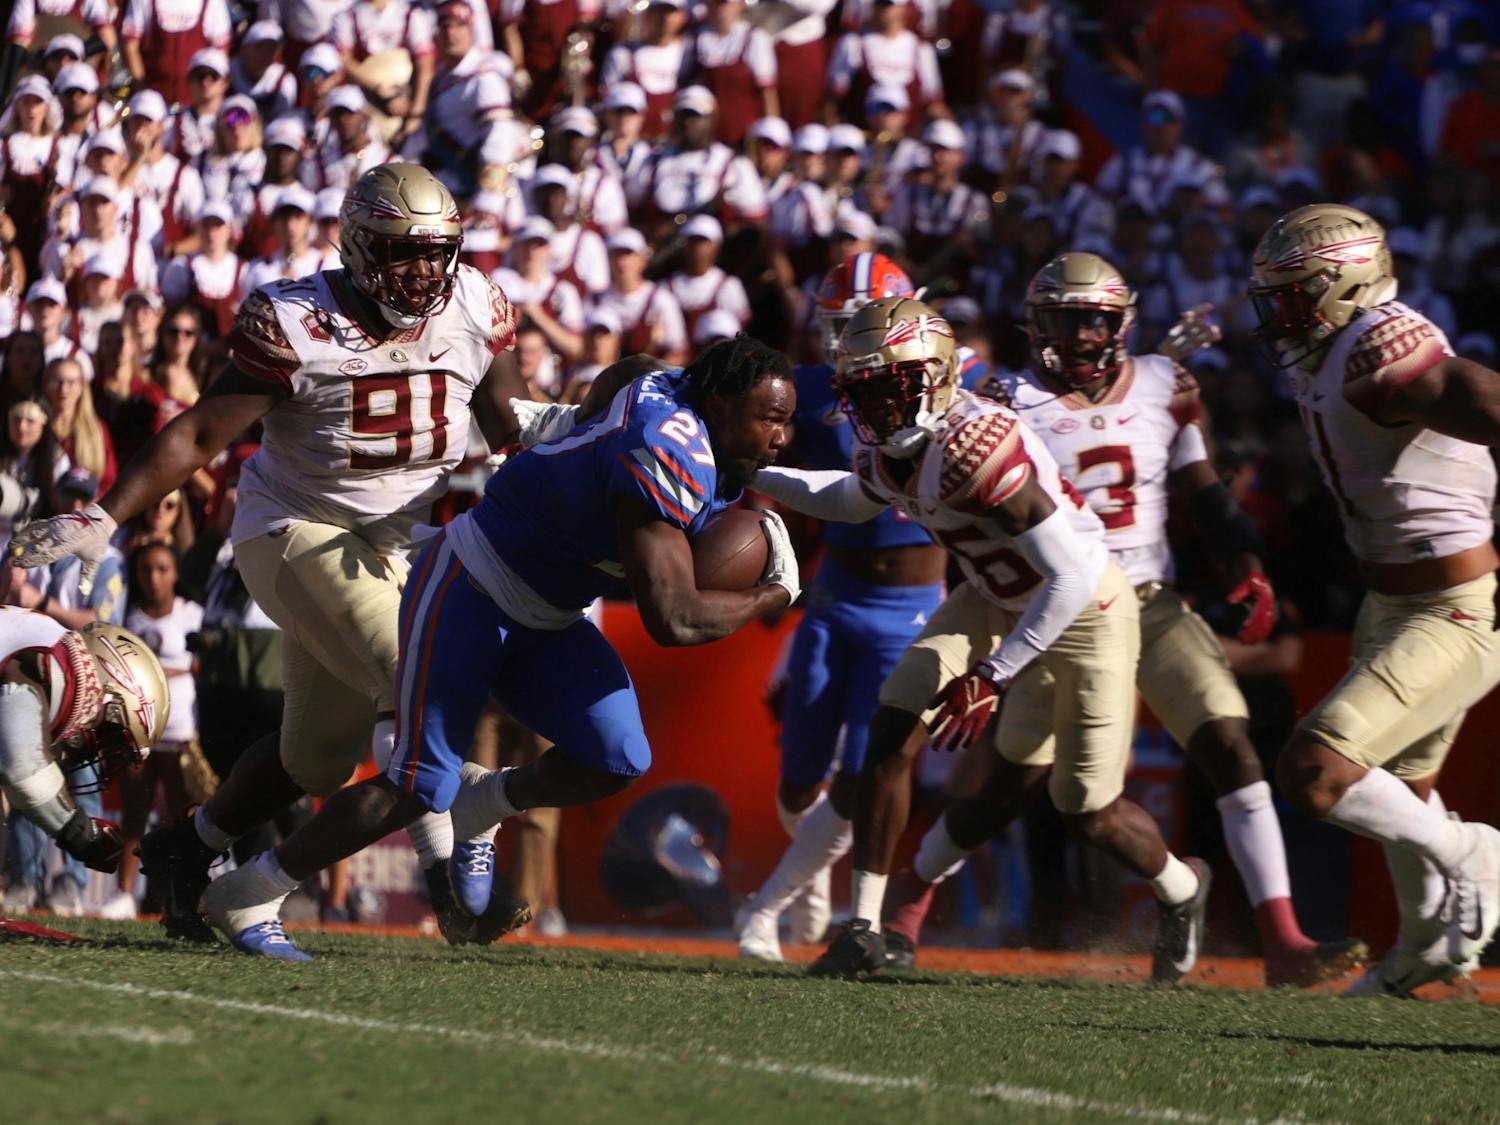 Florida's Dameon Pierce runs toward the end zone after losing his helmet during a Nov. 27 game against Florida State.